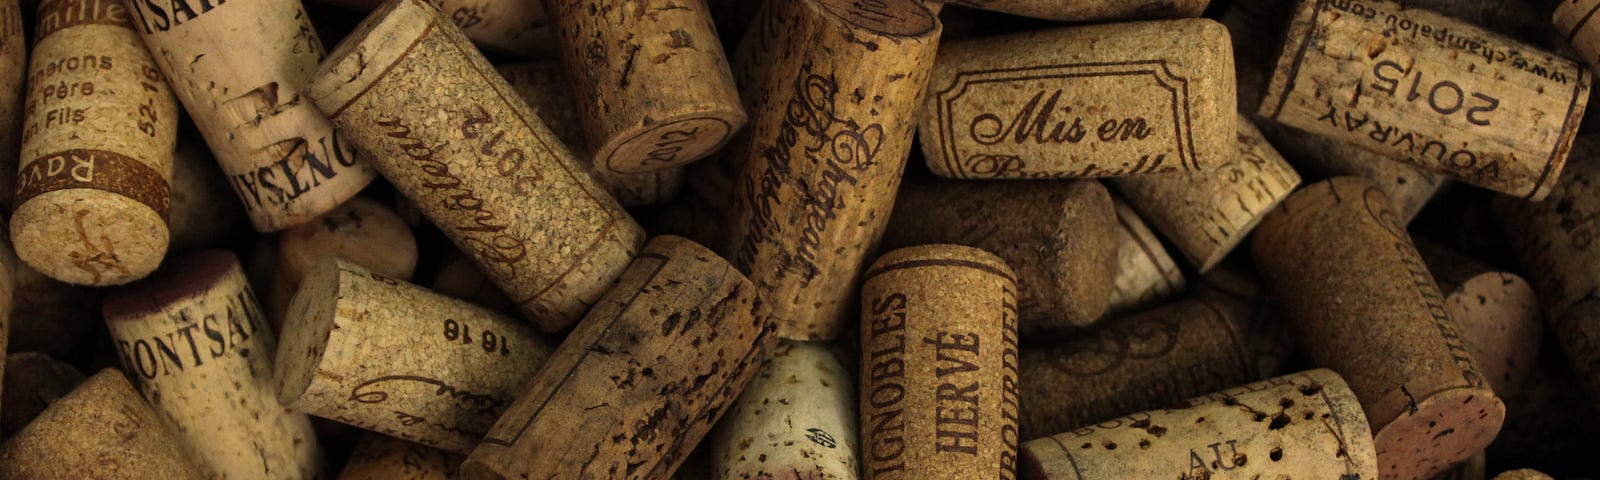 There’s a collection of wine corks in a pile.